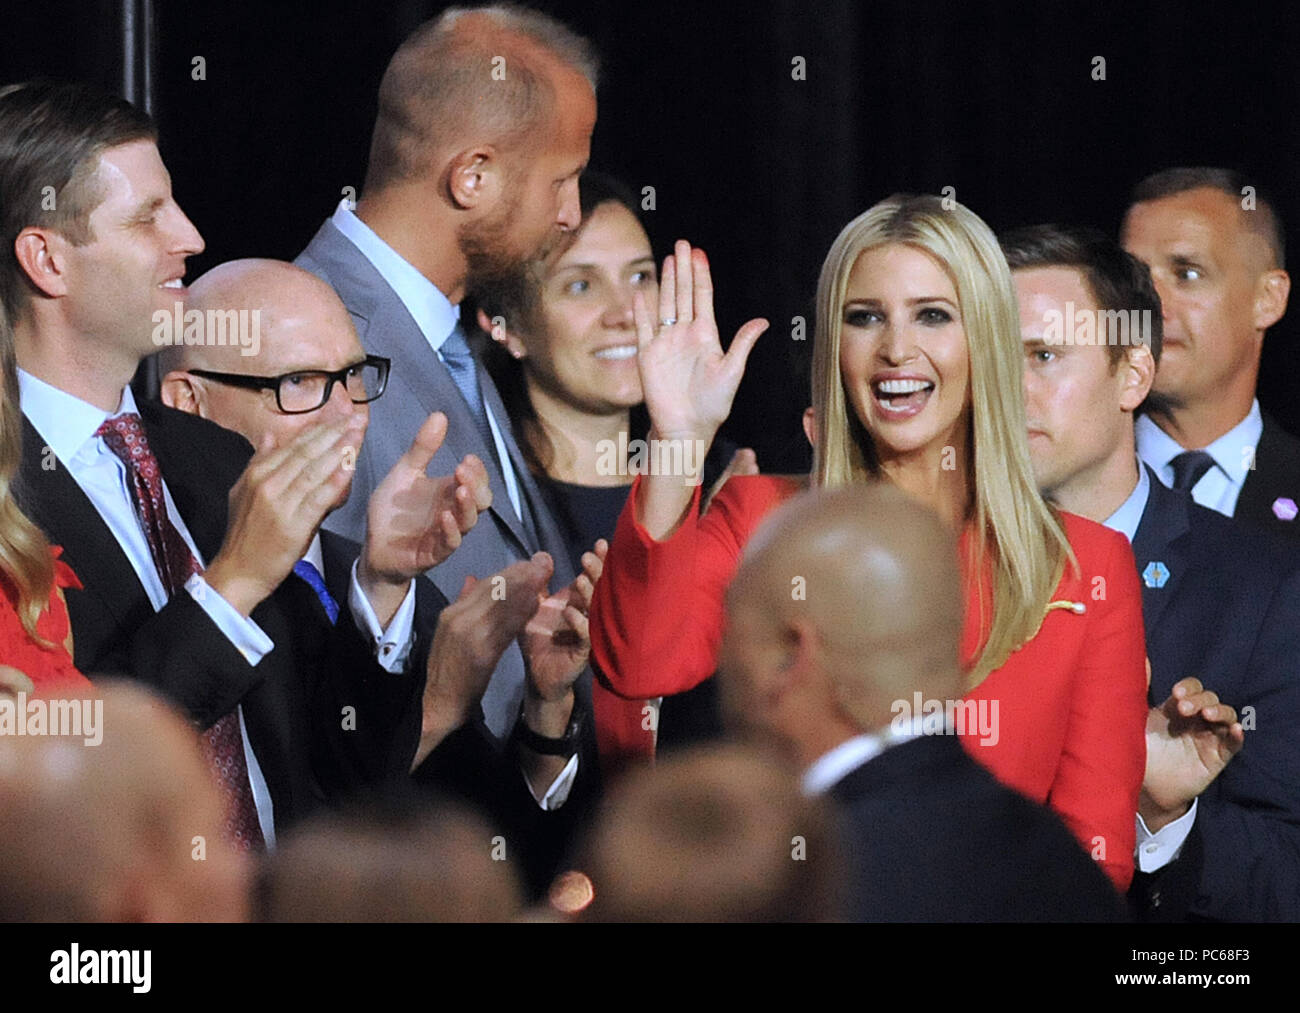 Tampa, Florida, USA. 31st July 2018. U.S. President Donald Trump's daughter, Ivanka Trump, waves as her father introduces her at a Make America Great Again Rally on July 31, 2018 at the Florida State Fairgrounds in Tampa, Florida. President Trump's son, Eric, is seen clapping at left.(Paul Hennessy/Alamy) Credit: Paul Hennessy/Alamy Live News Stock Photo